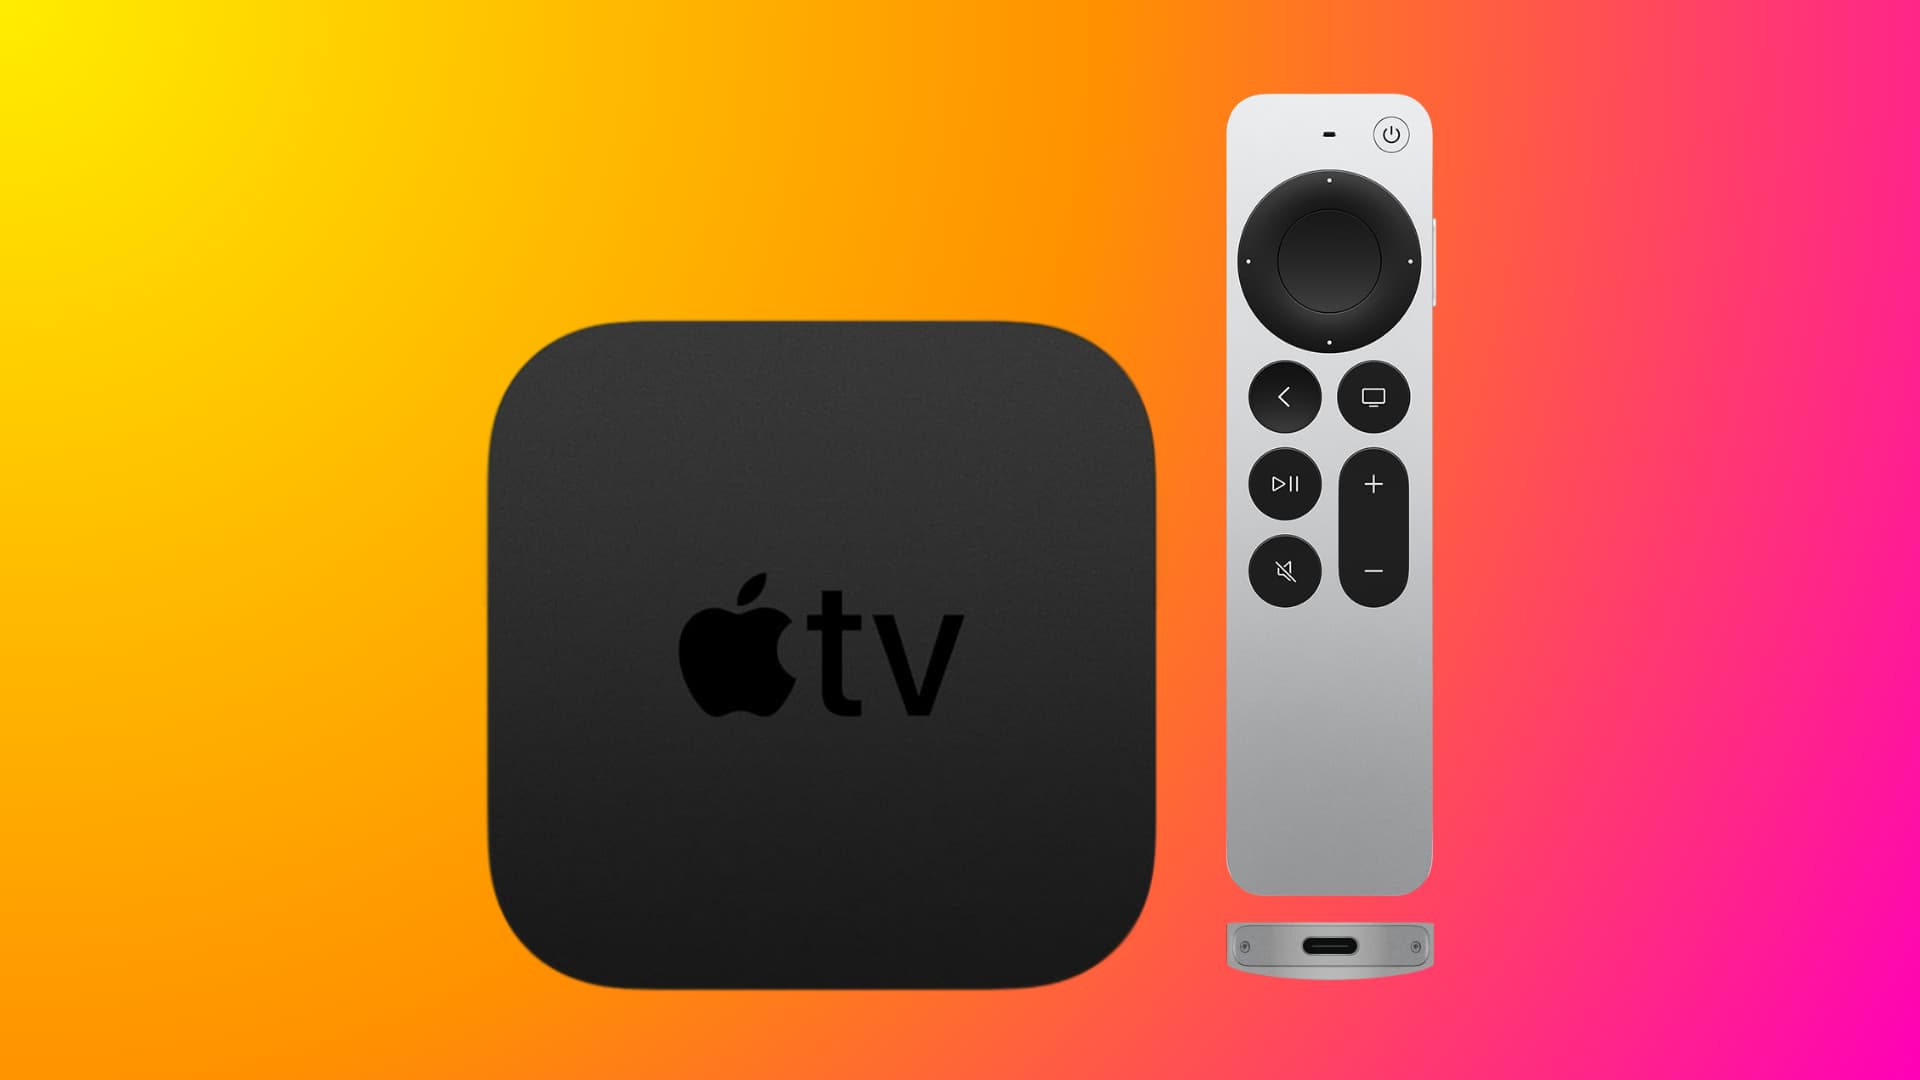 Apple TV and Siri Remote on a red yellow gradient background